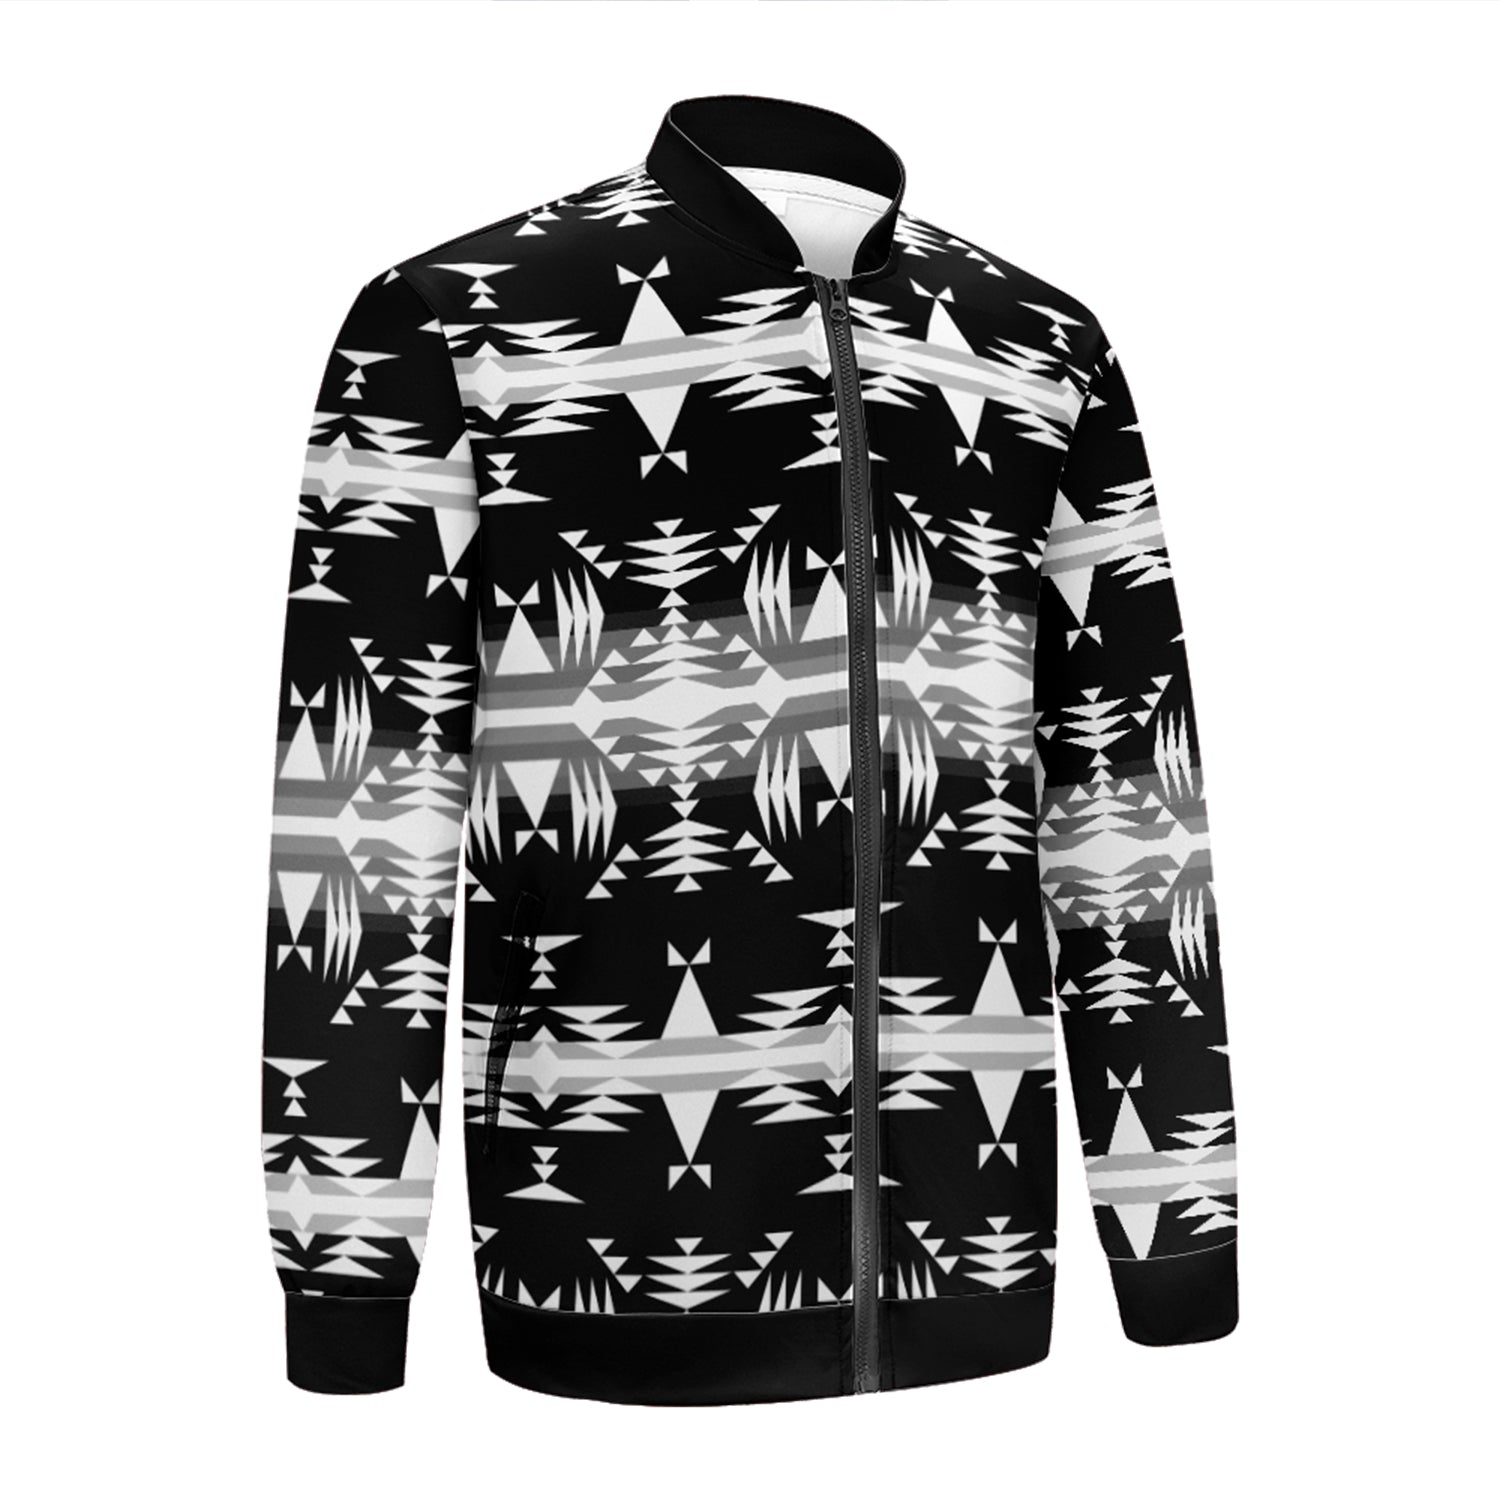 Between the Mountains Black and White Youth Zippered Collared Lightweight Jacket